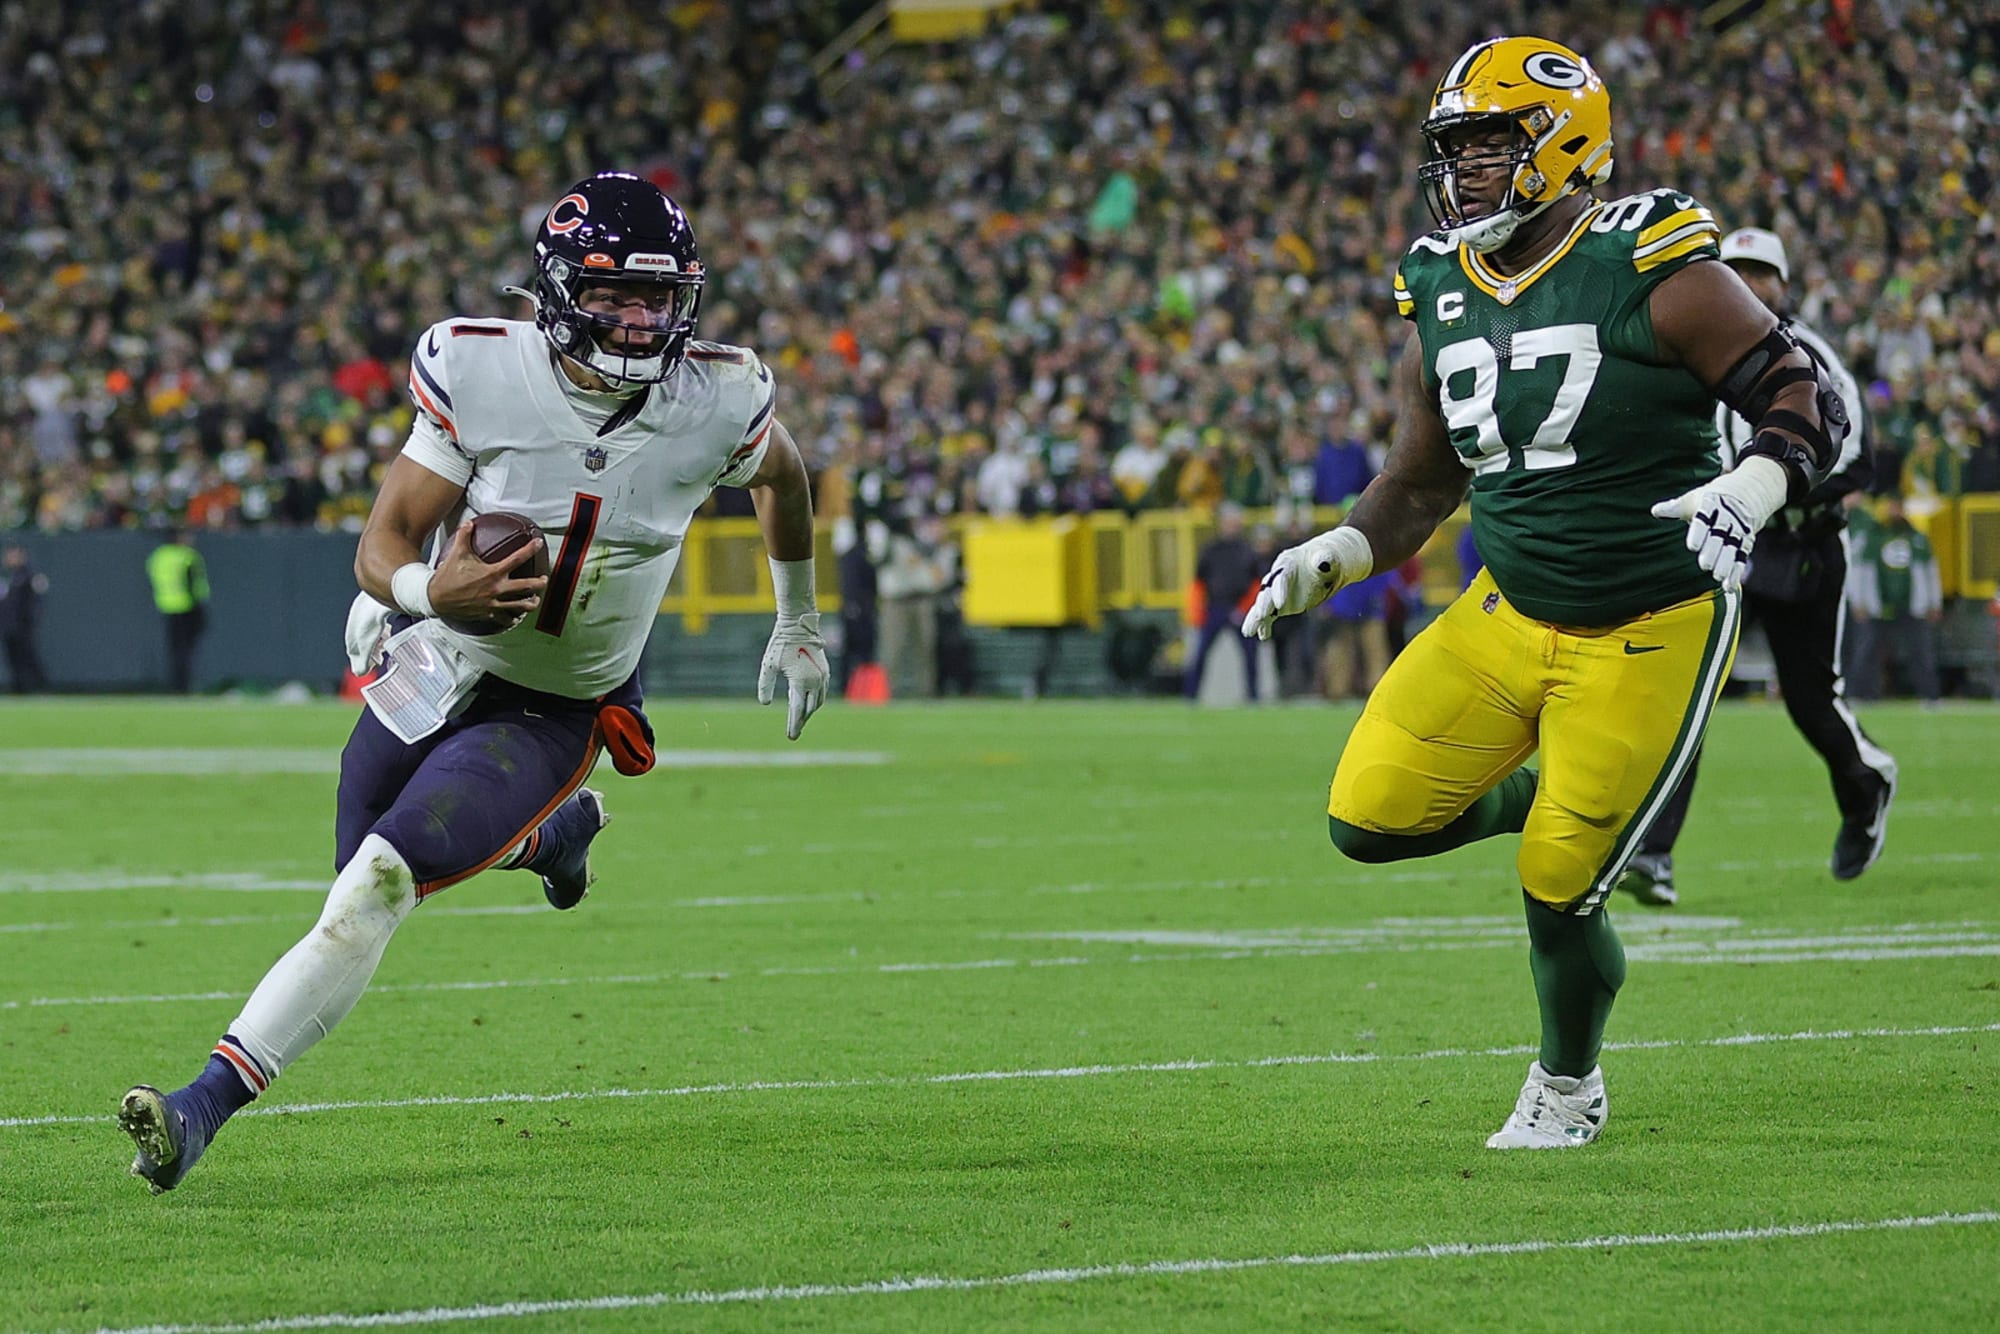 Chicago Bears: What to Watch for in Week 2 vs Green Bay Packers